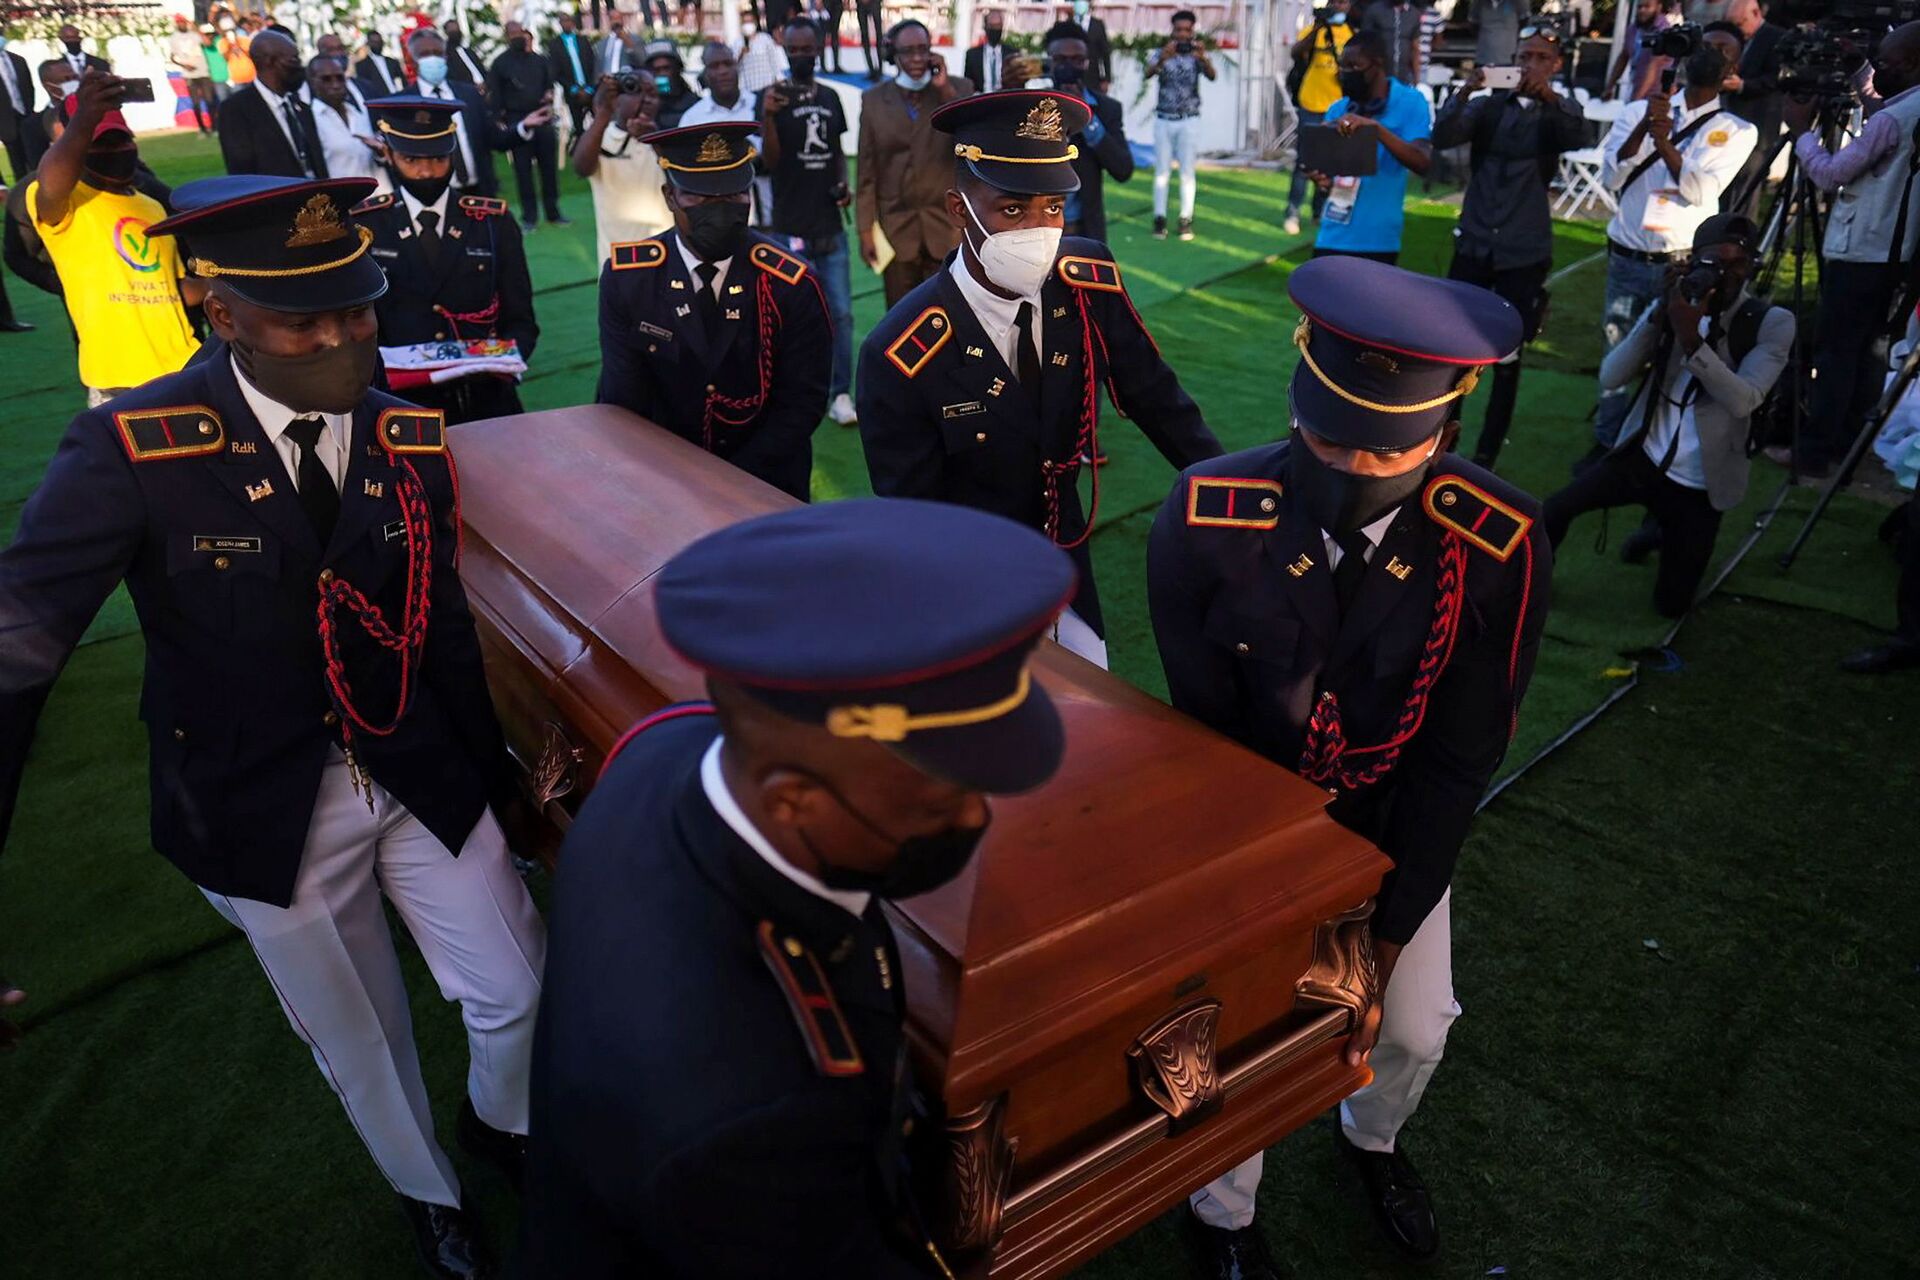 Pallbearers in military attire carry the coffin holding the body of late Haitian President Jovenel Moise after he was shot dead at his home in Port-au-Prince earlier this month, in Cap-Haitien, July 23, 2021. REUTERS/Ricardo Arduengo - Sputnik International, 1920, 07.09.2021